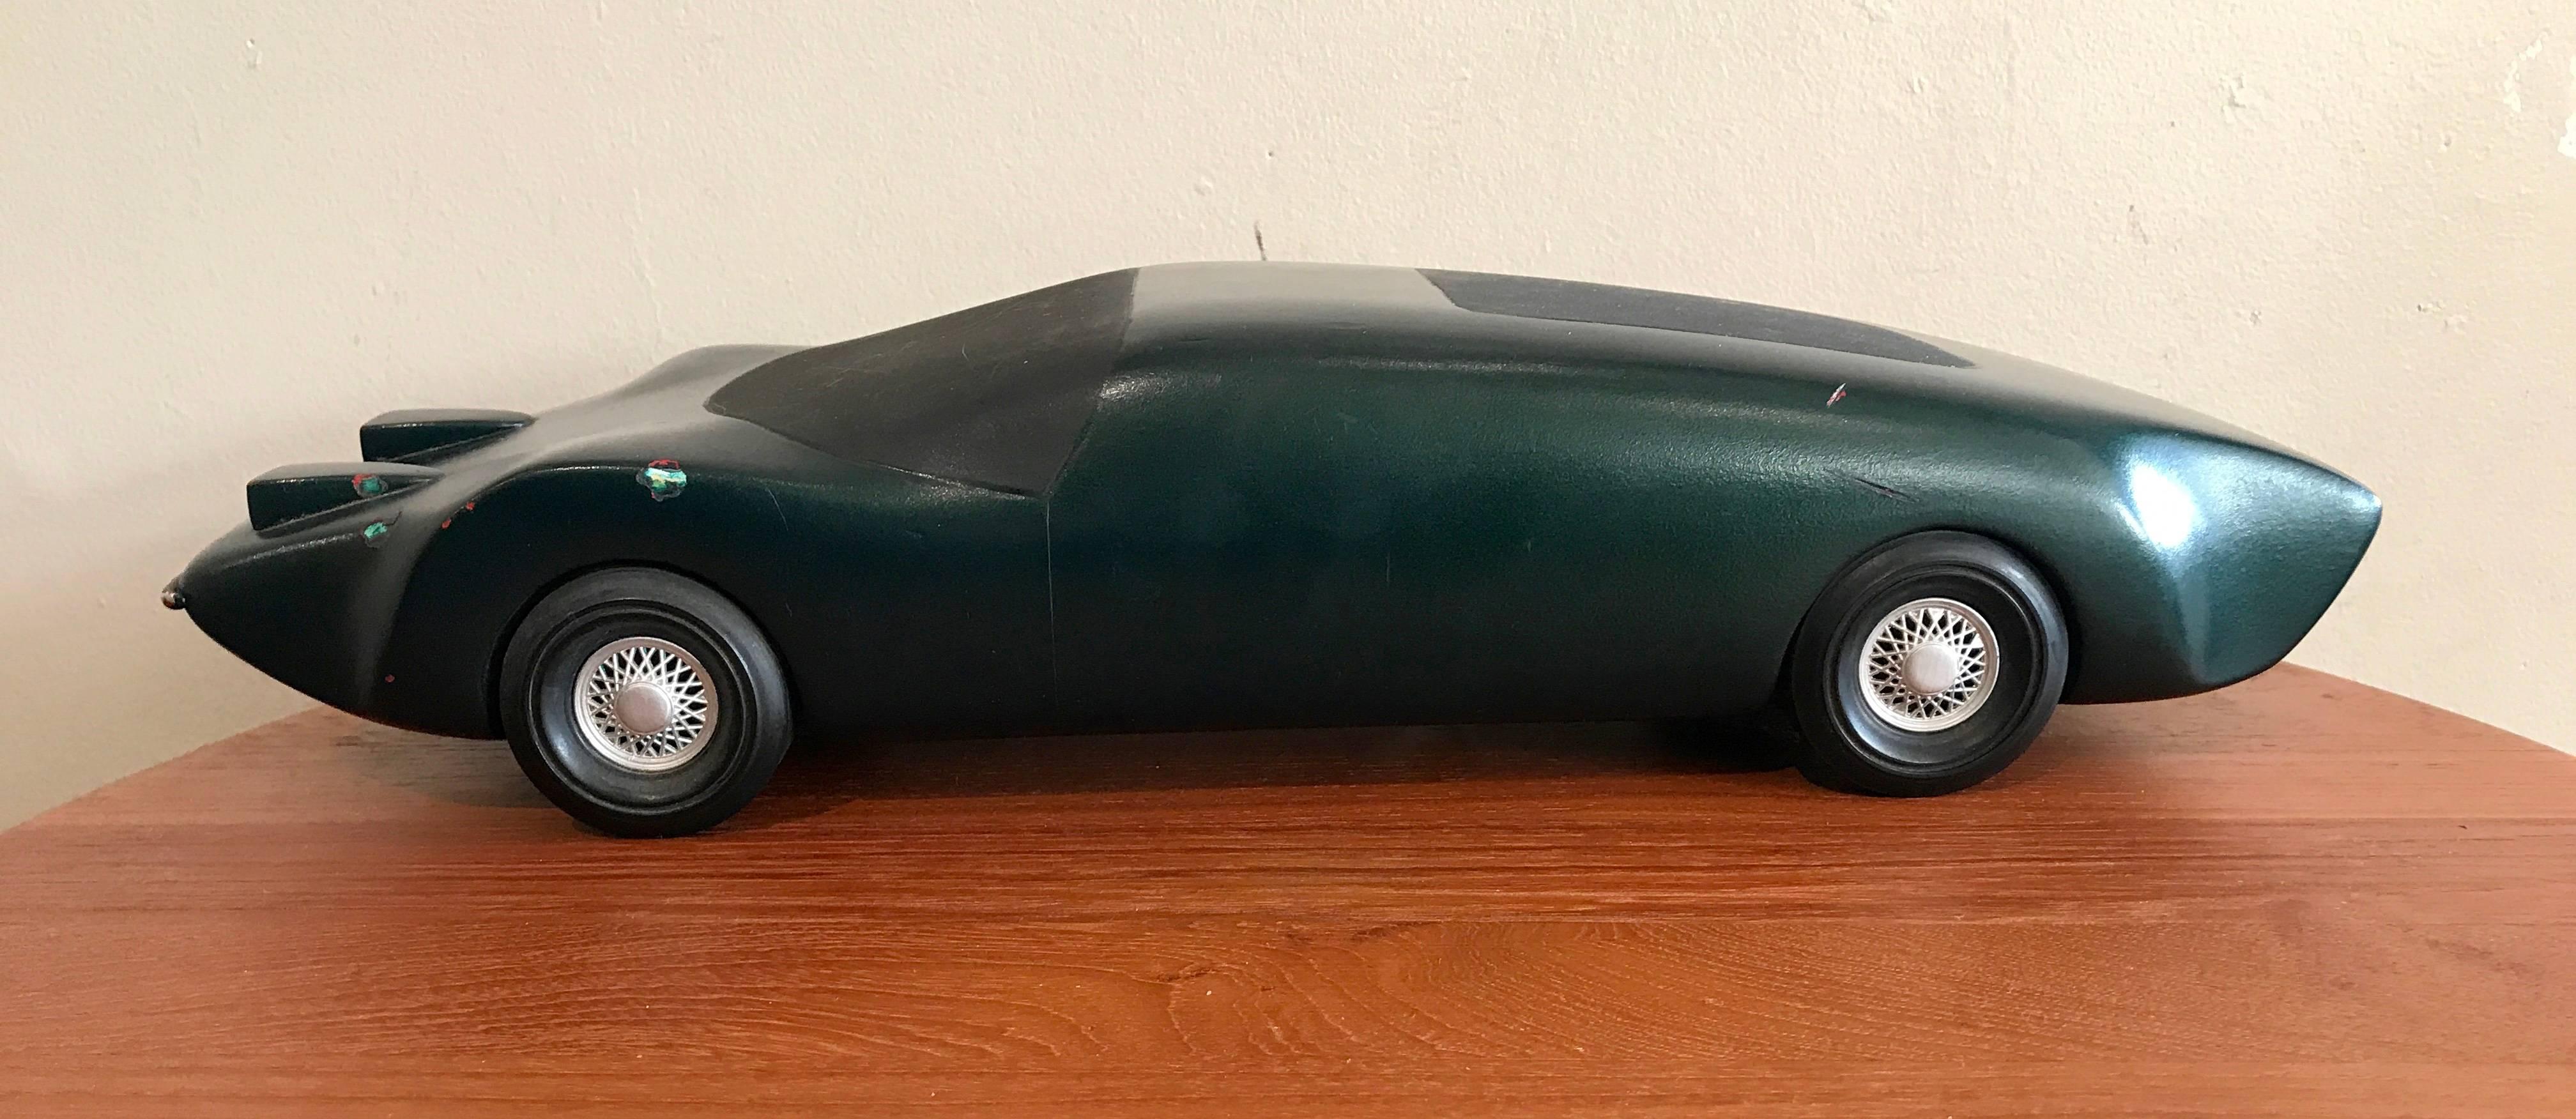 Wooden model car prototype said to be by a General Motors design works employee from the 1970s and then giving to design school students for inspiration. Solid wooden body painted green with rubber wheels. Wear to the surfaces from use as a design